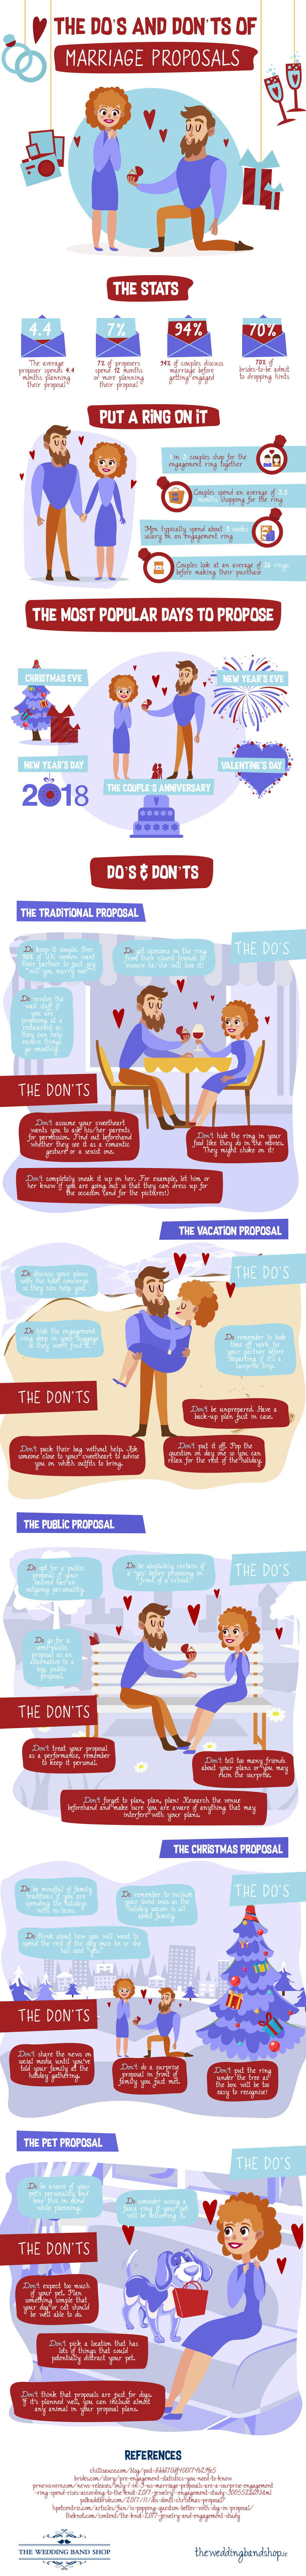 The Do’s & Don’ts of Marriage Proposals